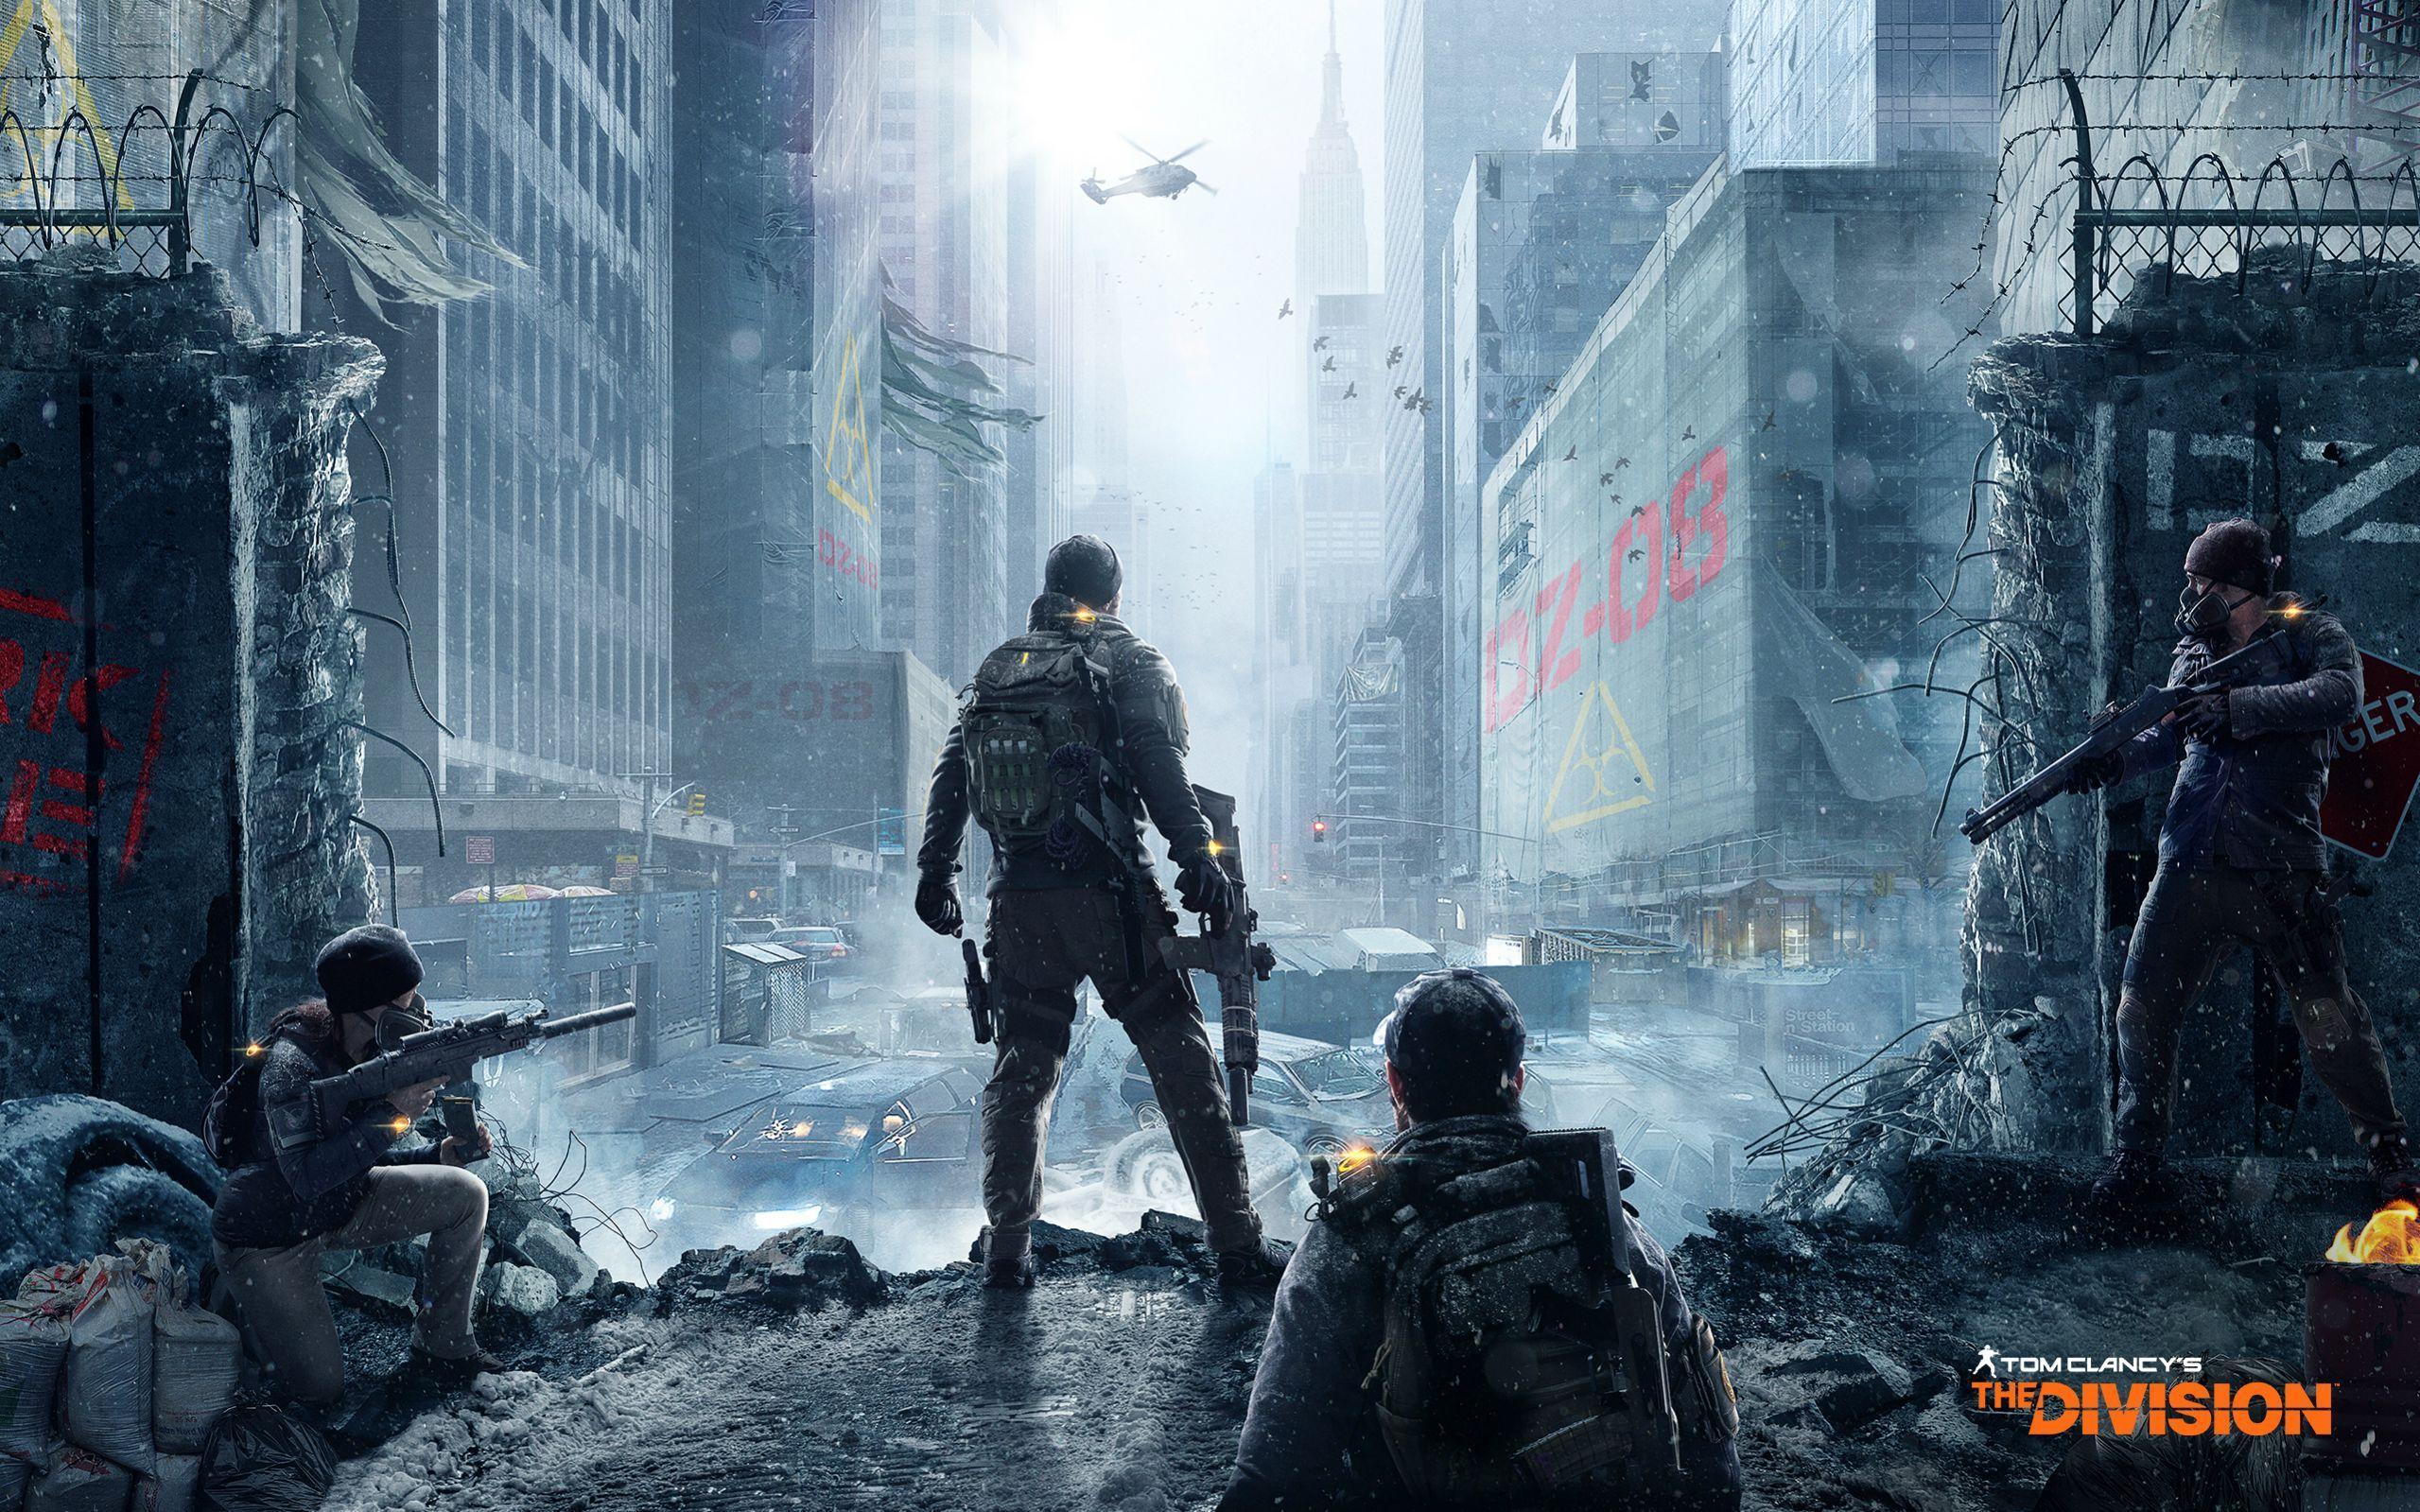 The Division Game 2016 Wallpaper. THE GAME FREAK SHOW